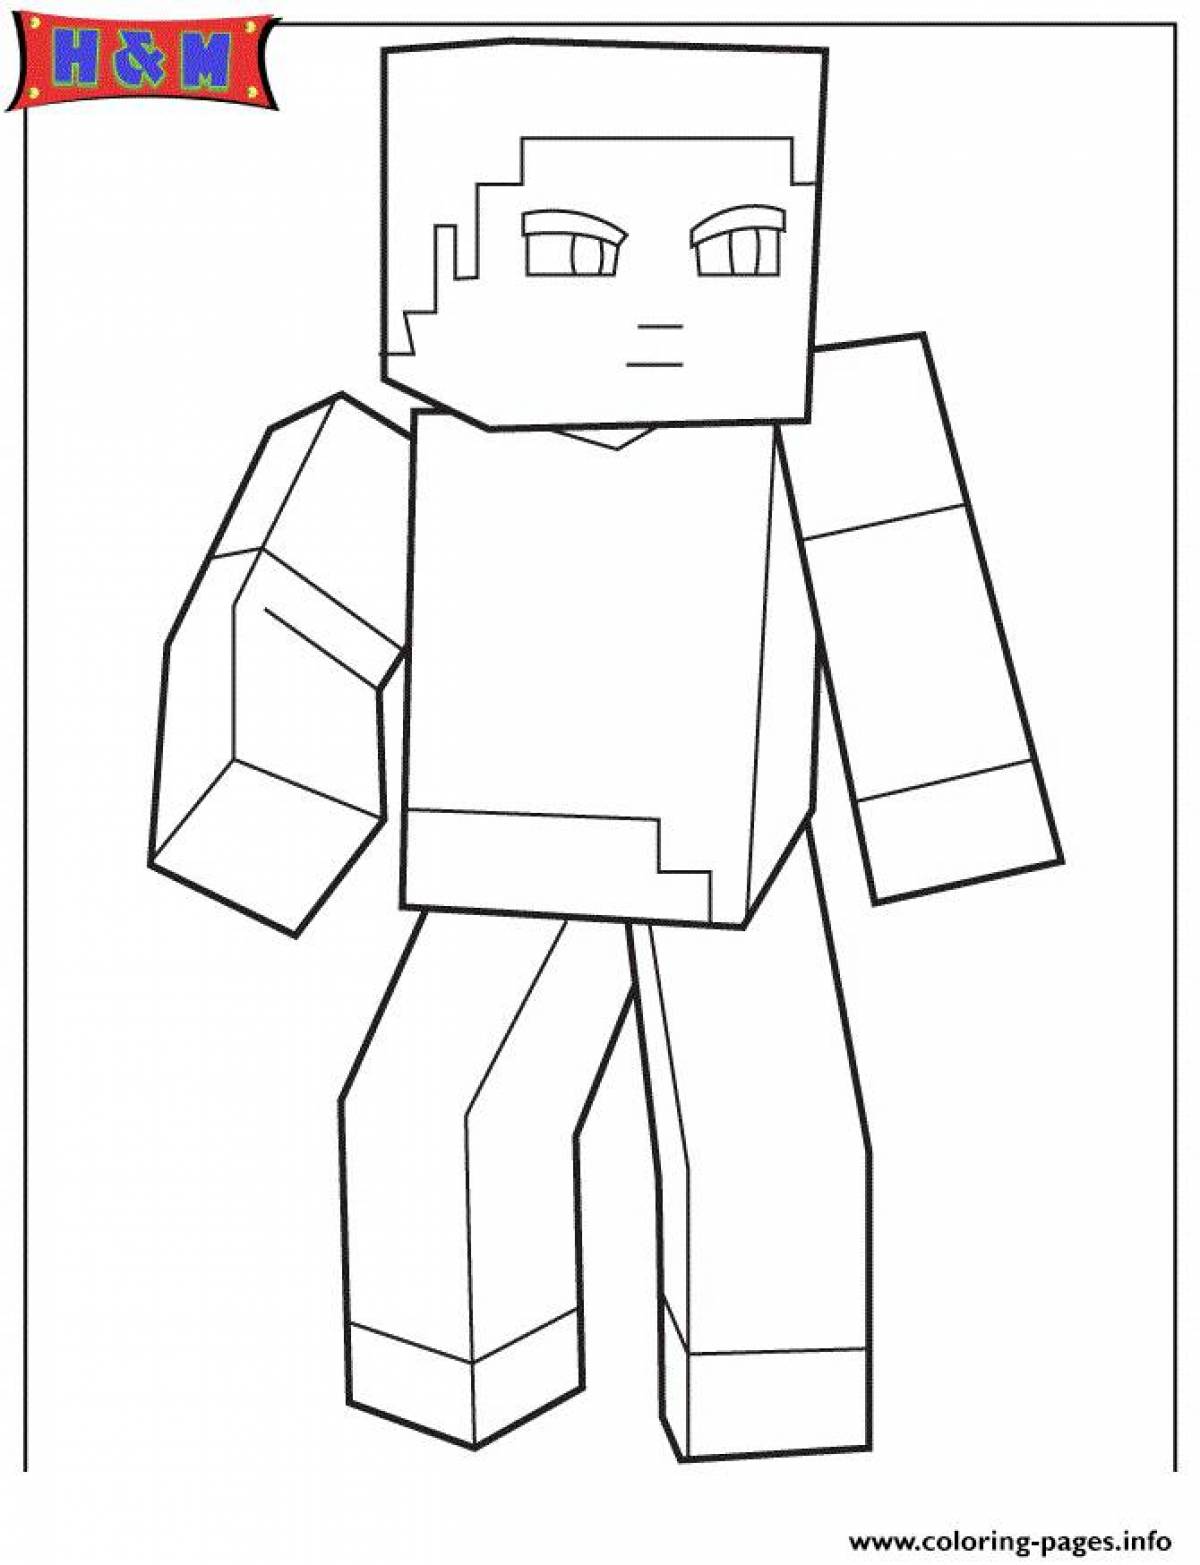 Steve's involvement coloring page